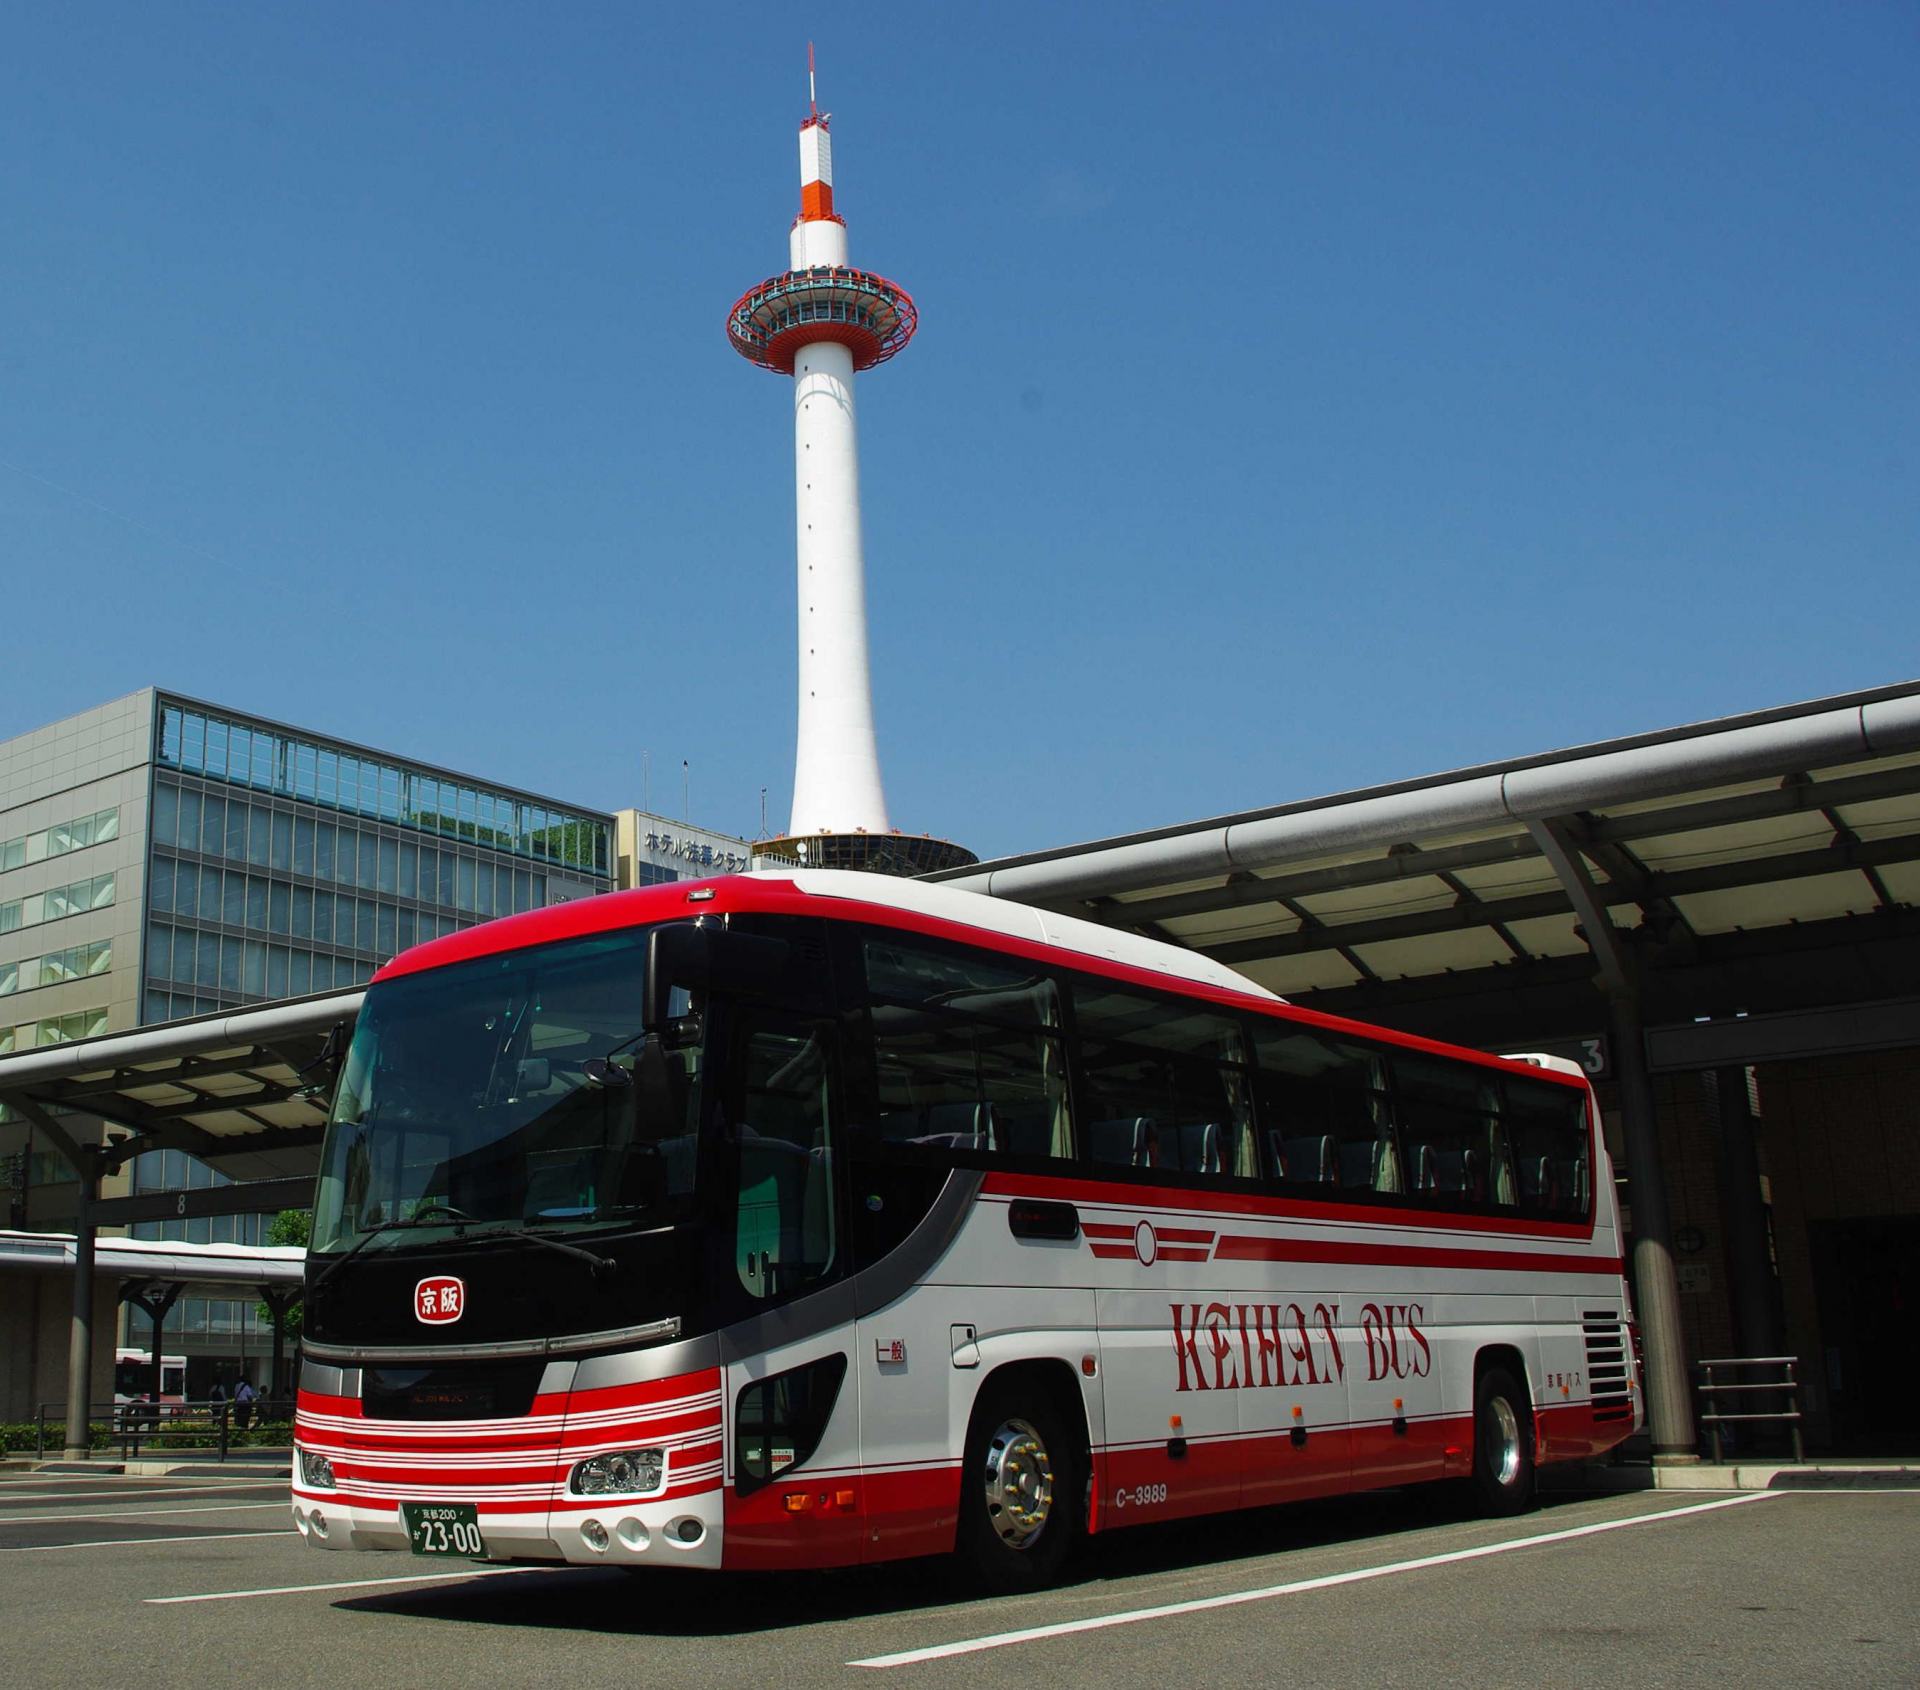 KYOTO SIGHTSEEING BUS 「Classic Kyoto」